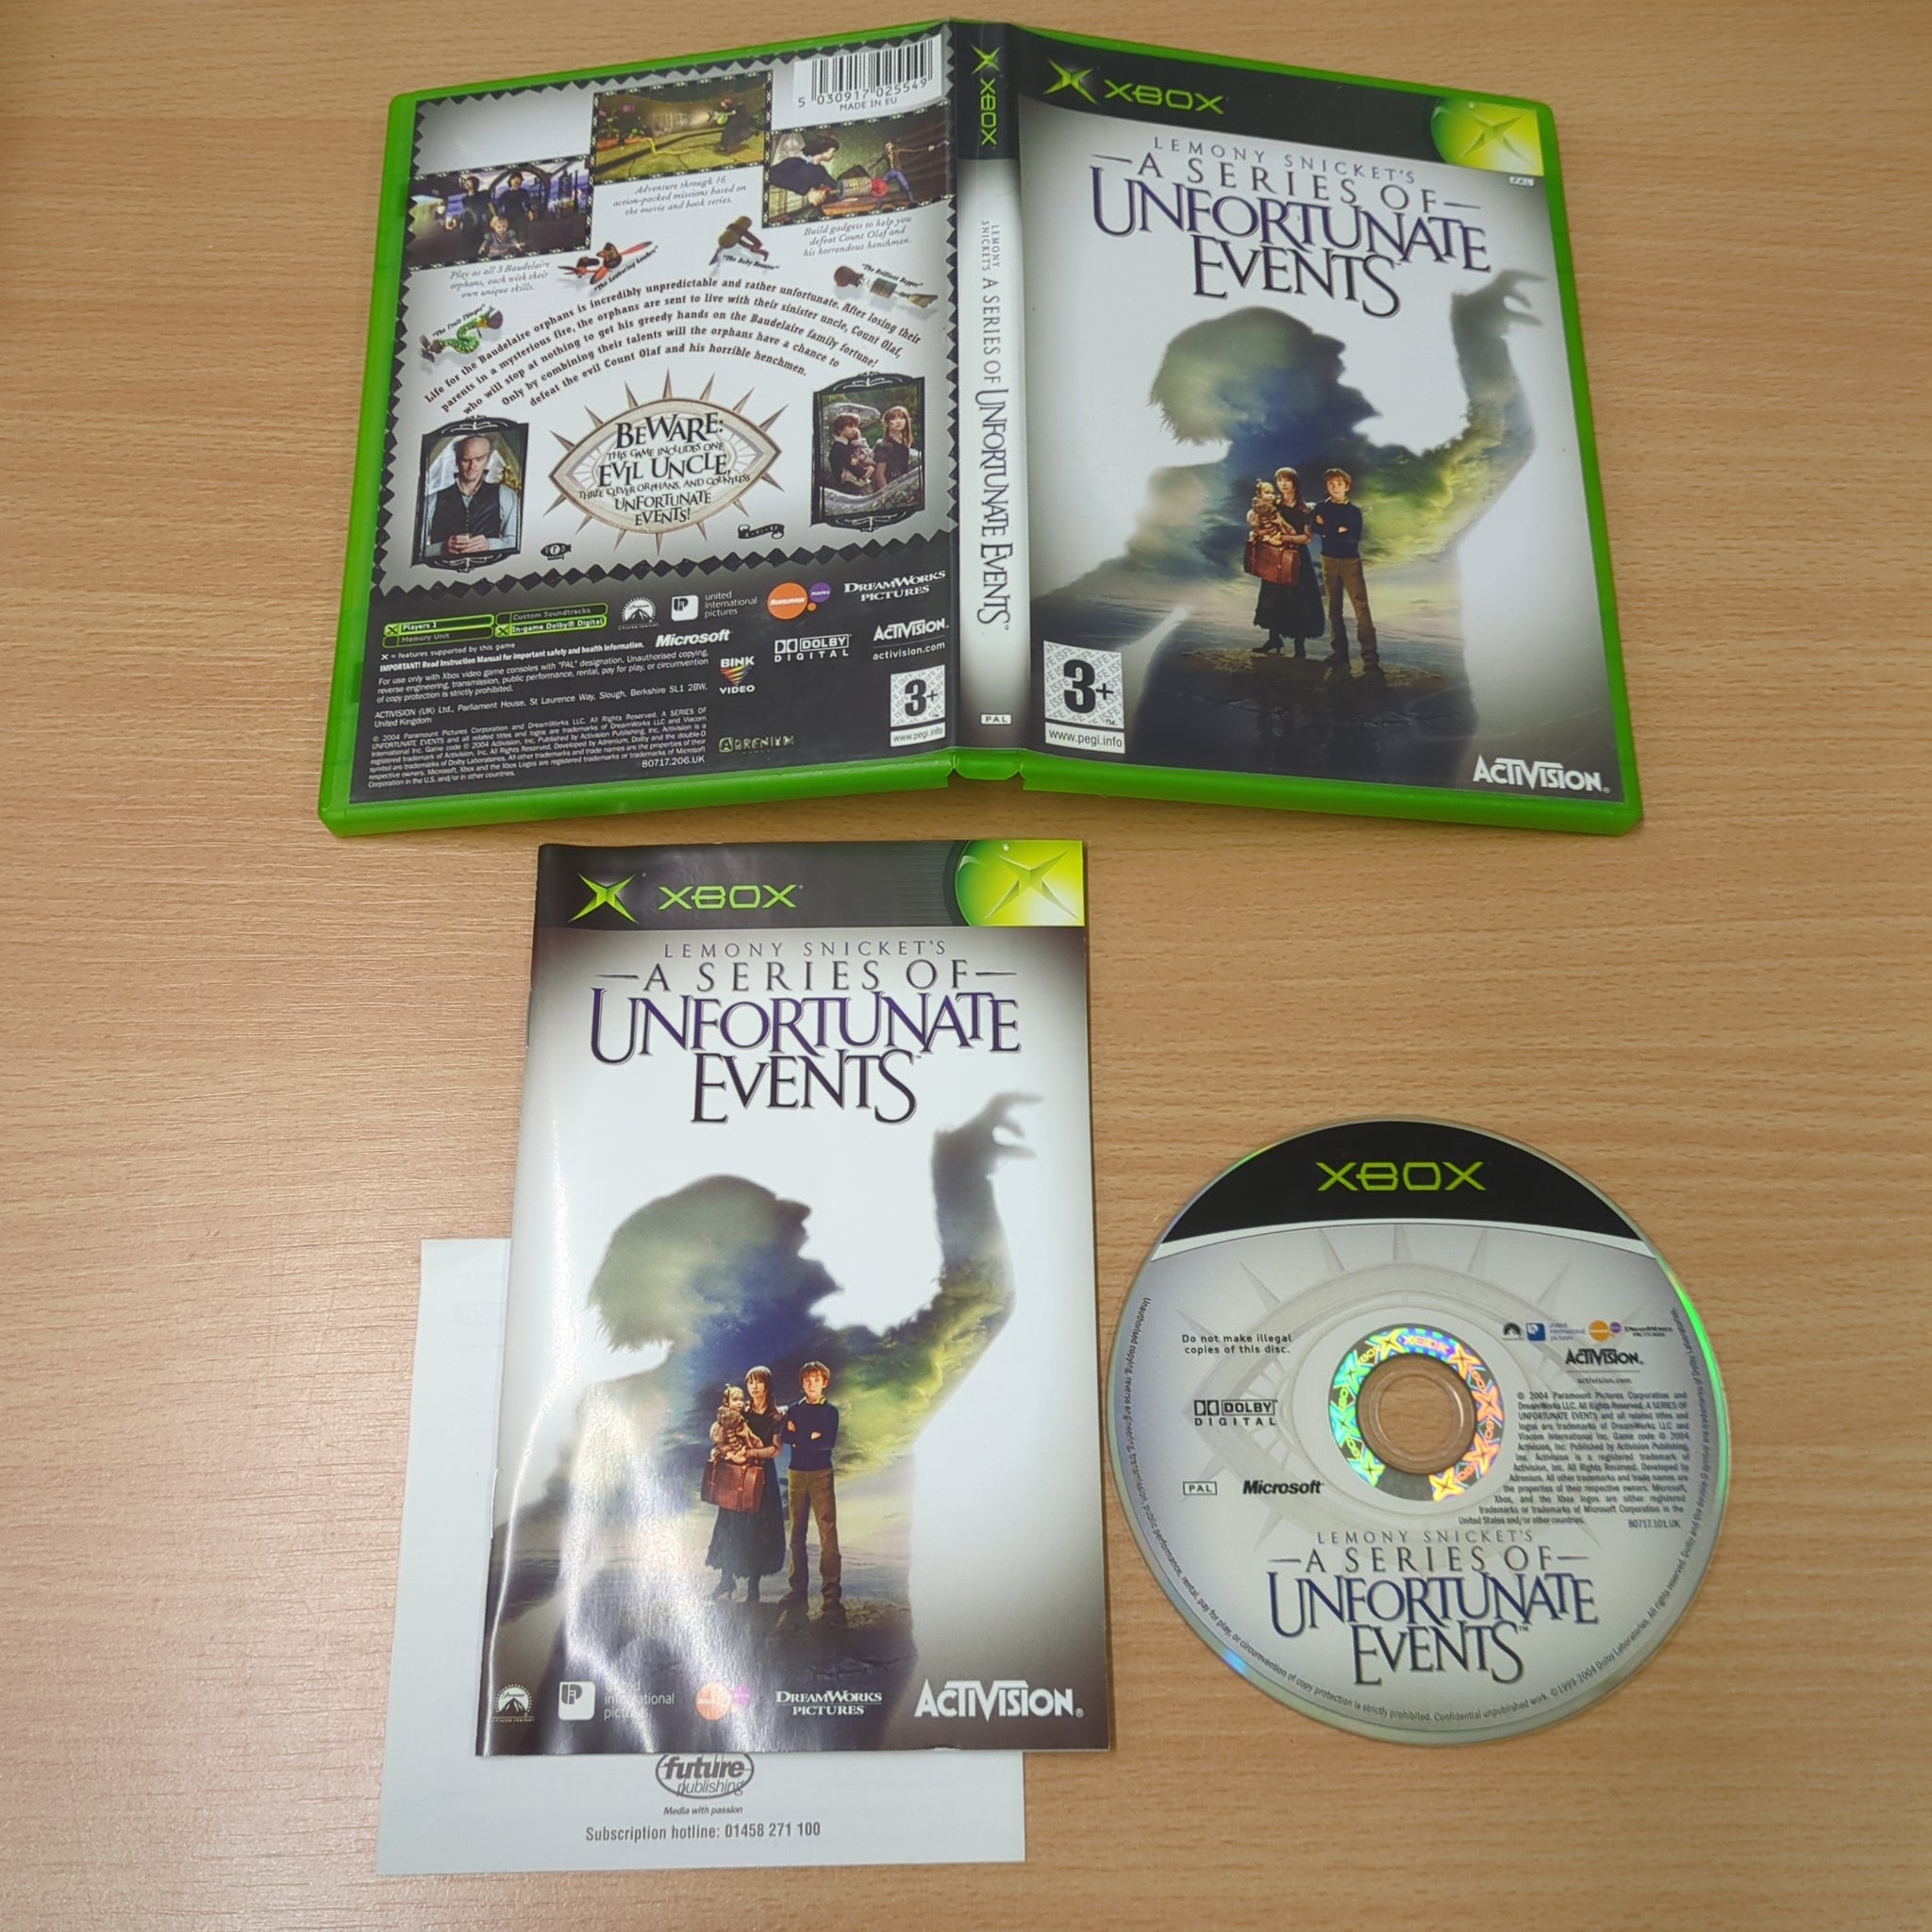 Lemony Snicket's A Series of Unfortunate Events original Xbox game